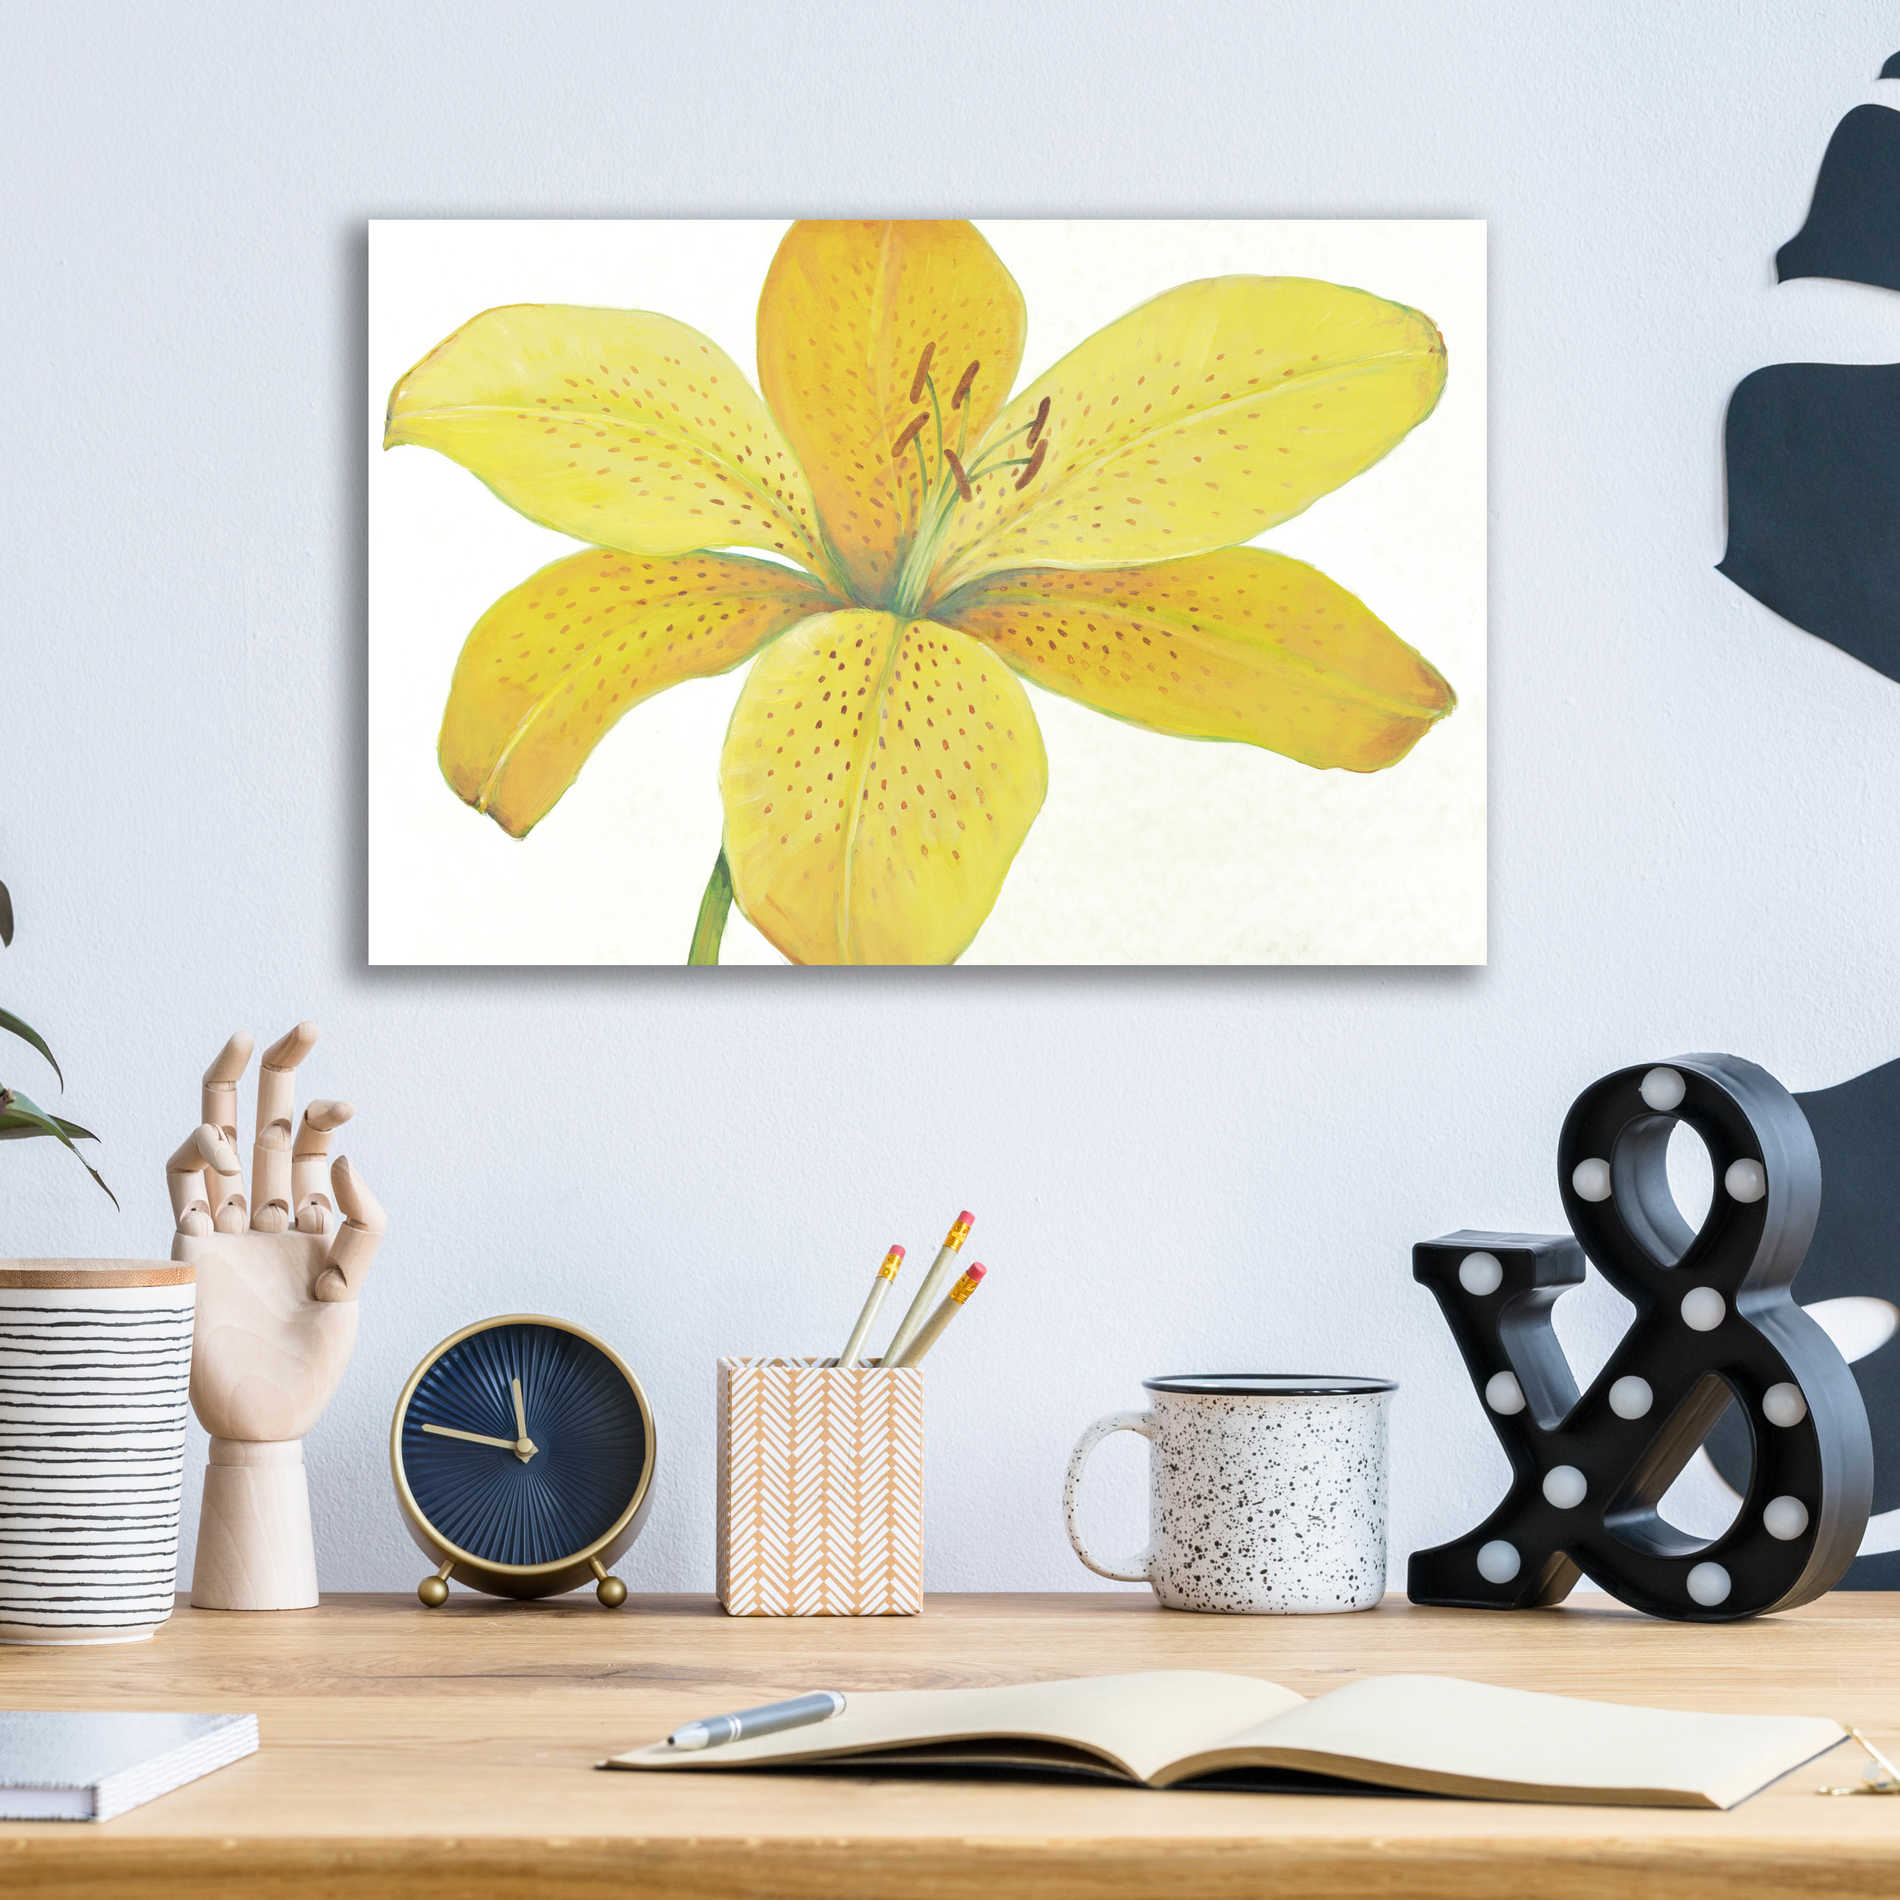 Epic Art 'Citron Tiger Lily II' by Tim O'Toole, Acrylic Glass Wall Art,16x12